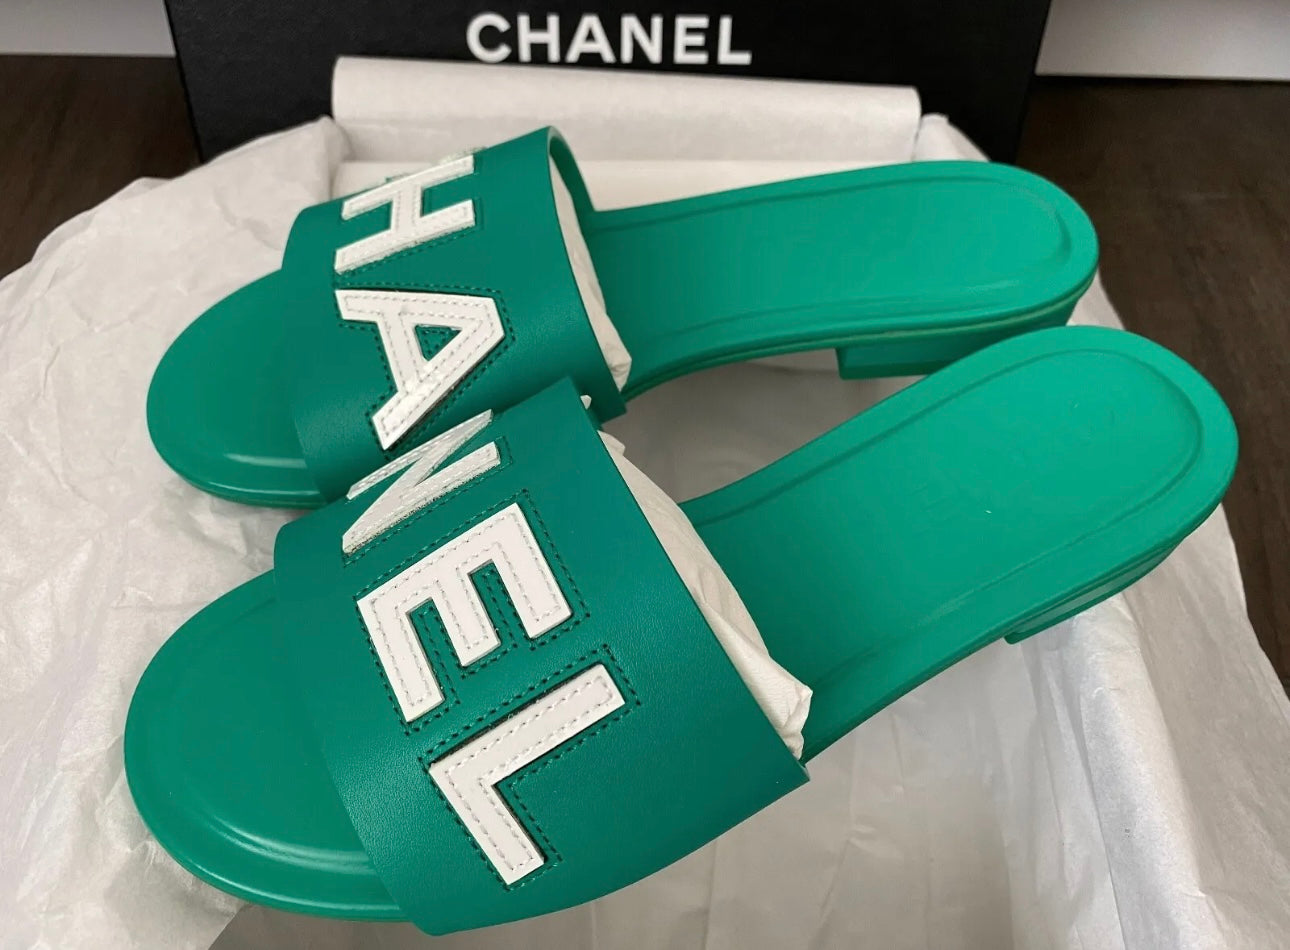 CHANEL CHA NEL LOGO GREEN LEATHER FLAT SHOES SLIDES MULES